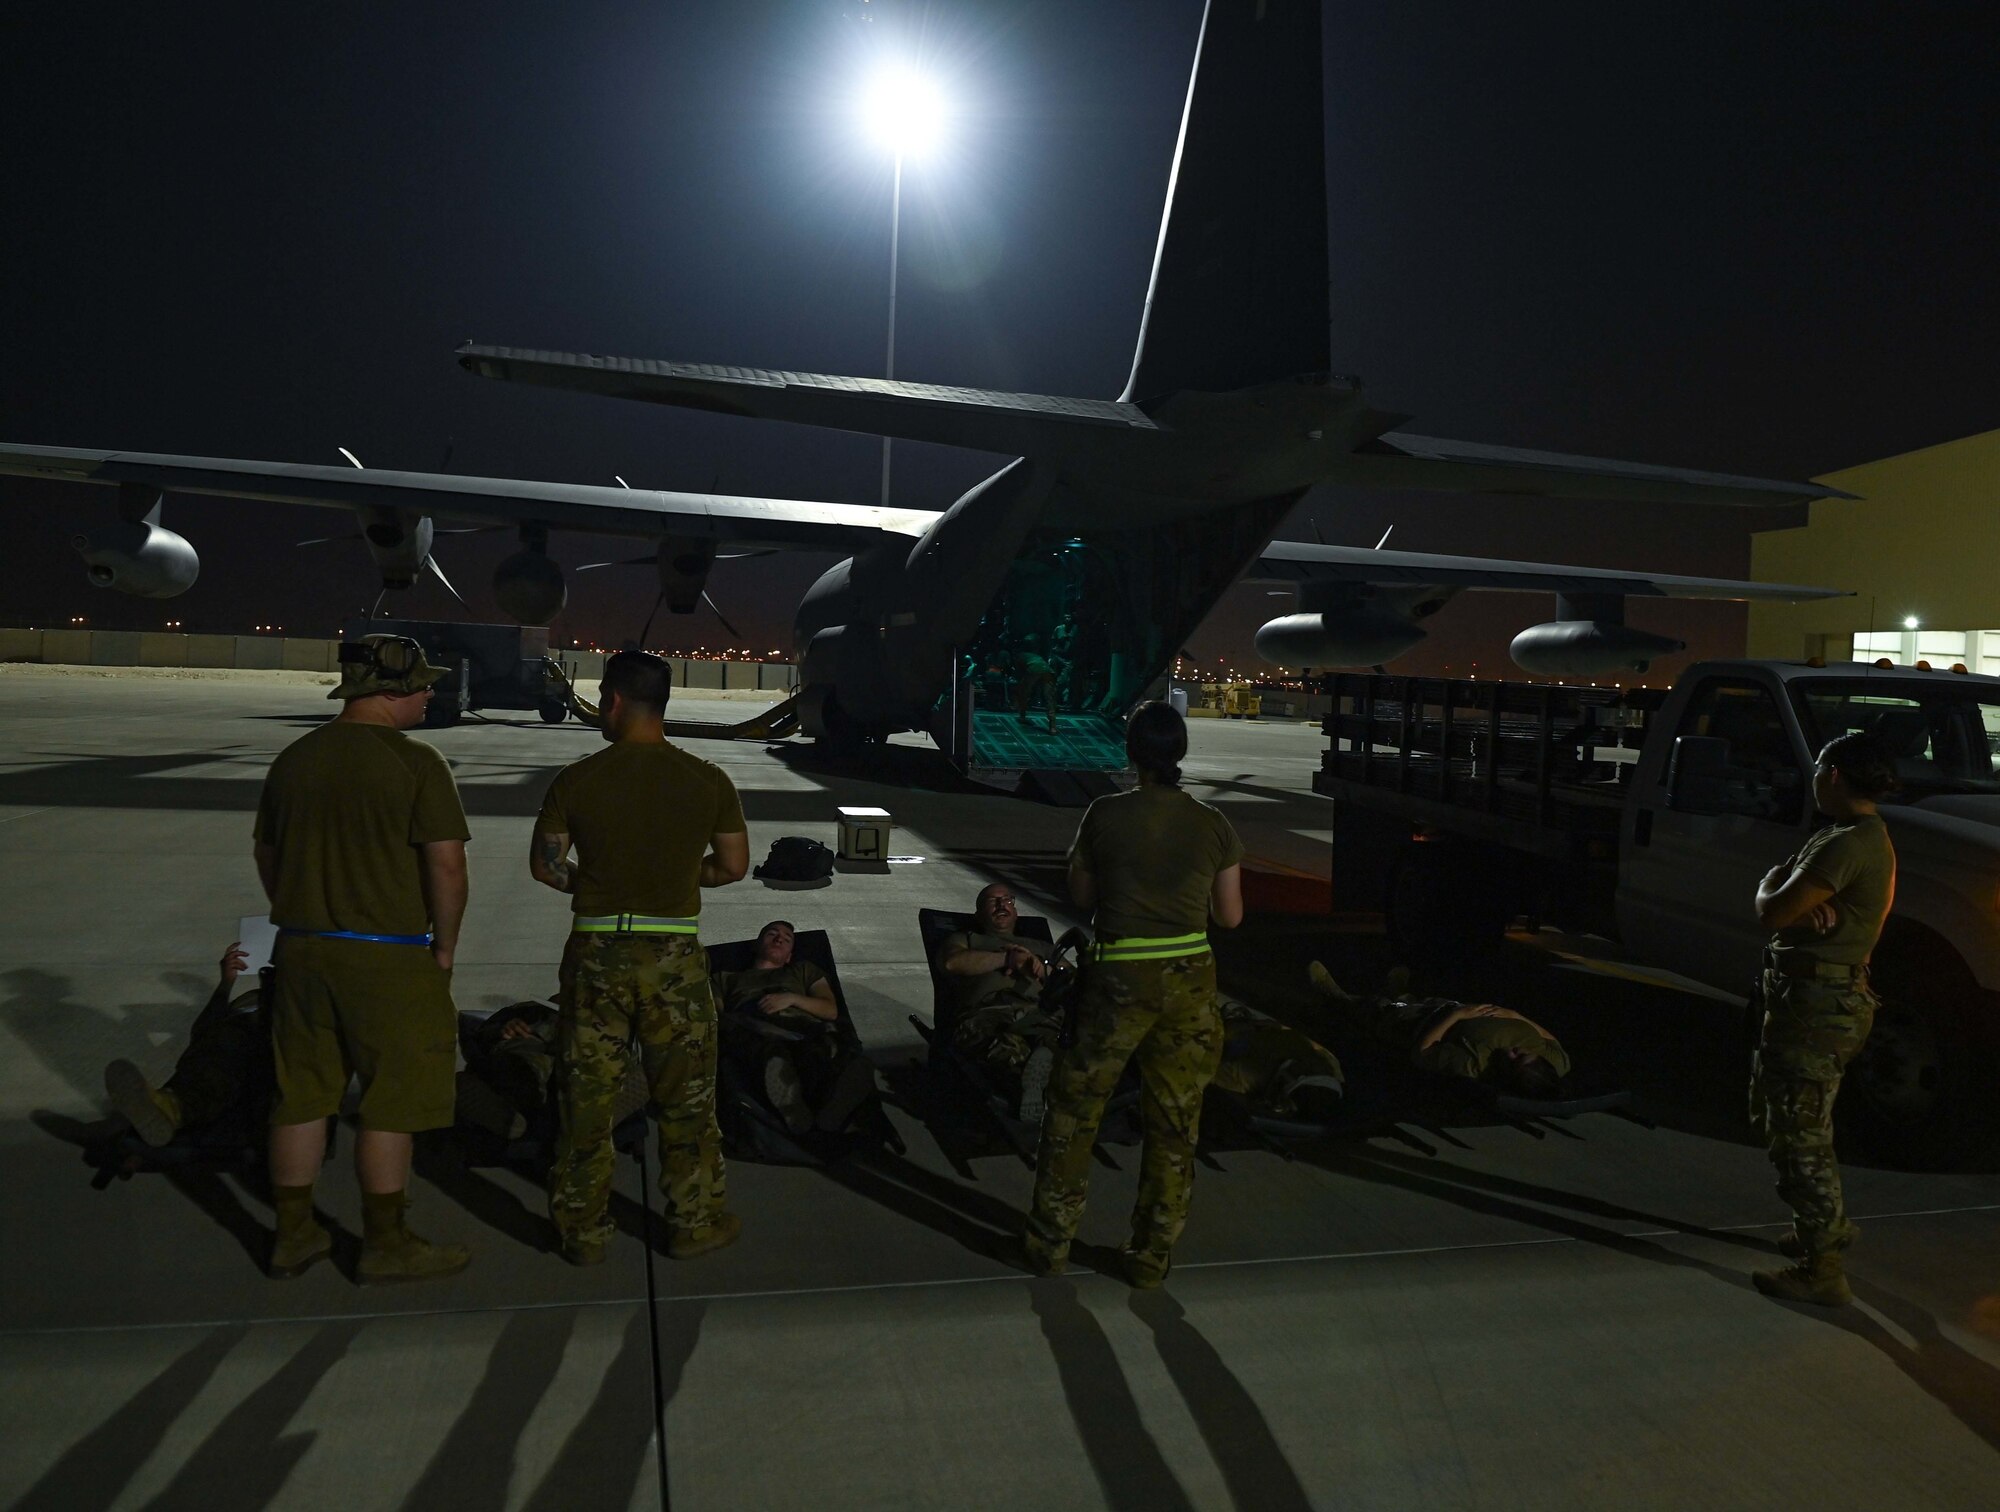 Patients with simulated wounds await transport aboard an MC-130J Commando II aircraft during an exercise Aug 4, 2022 at Al Udeid Airbase, Qatar. The exercise allowed multiple organizations including medical, maintenance and aircrew to train together during casualty care and transportation. (U.S. Air National Guard photo by Master Sgt. Michael J. Kelly)